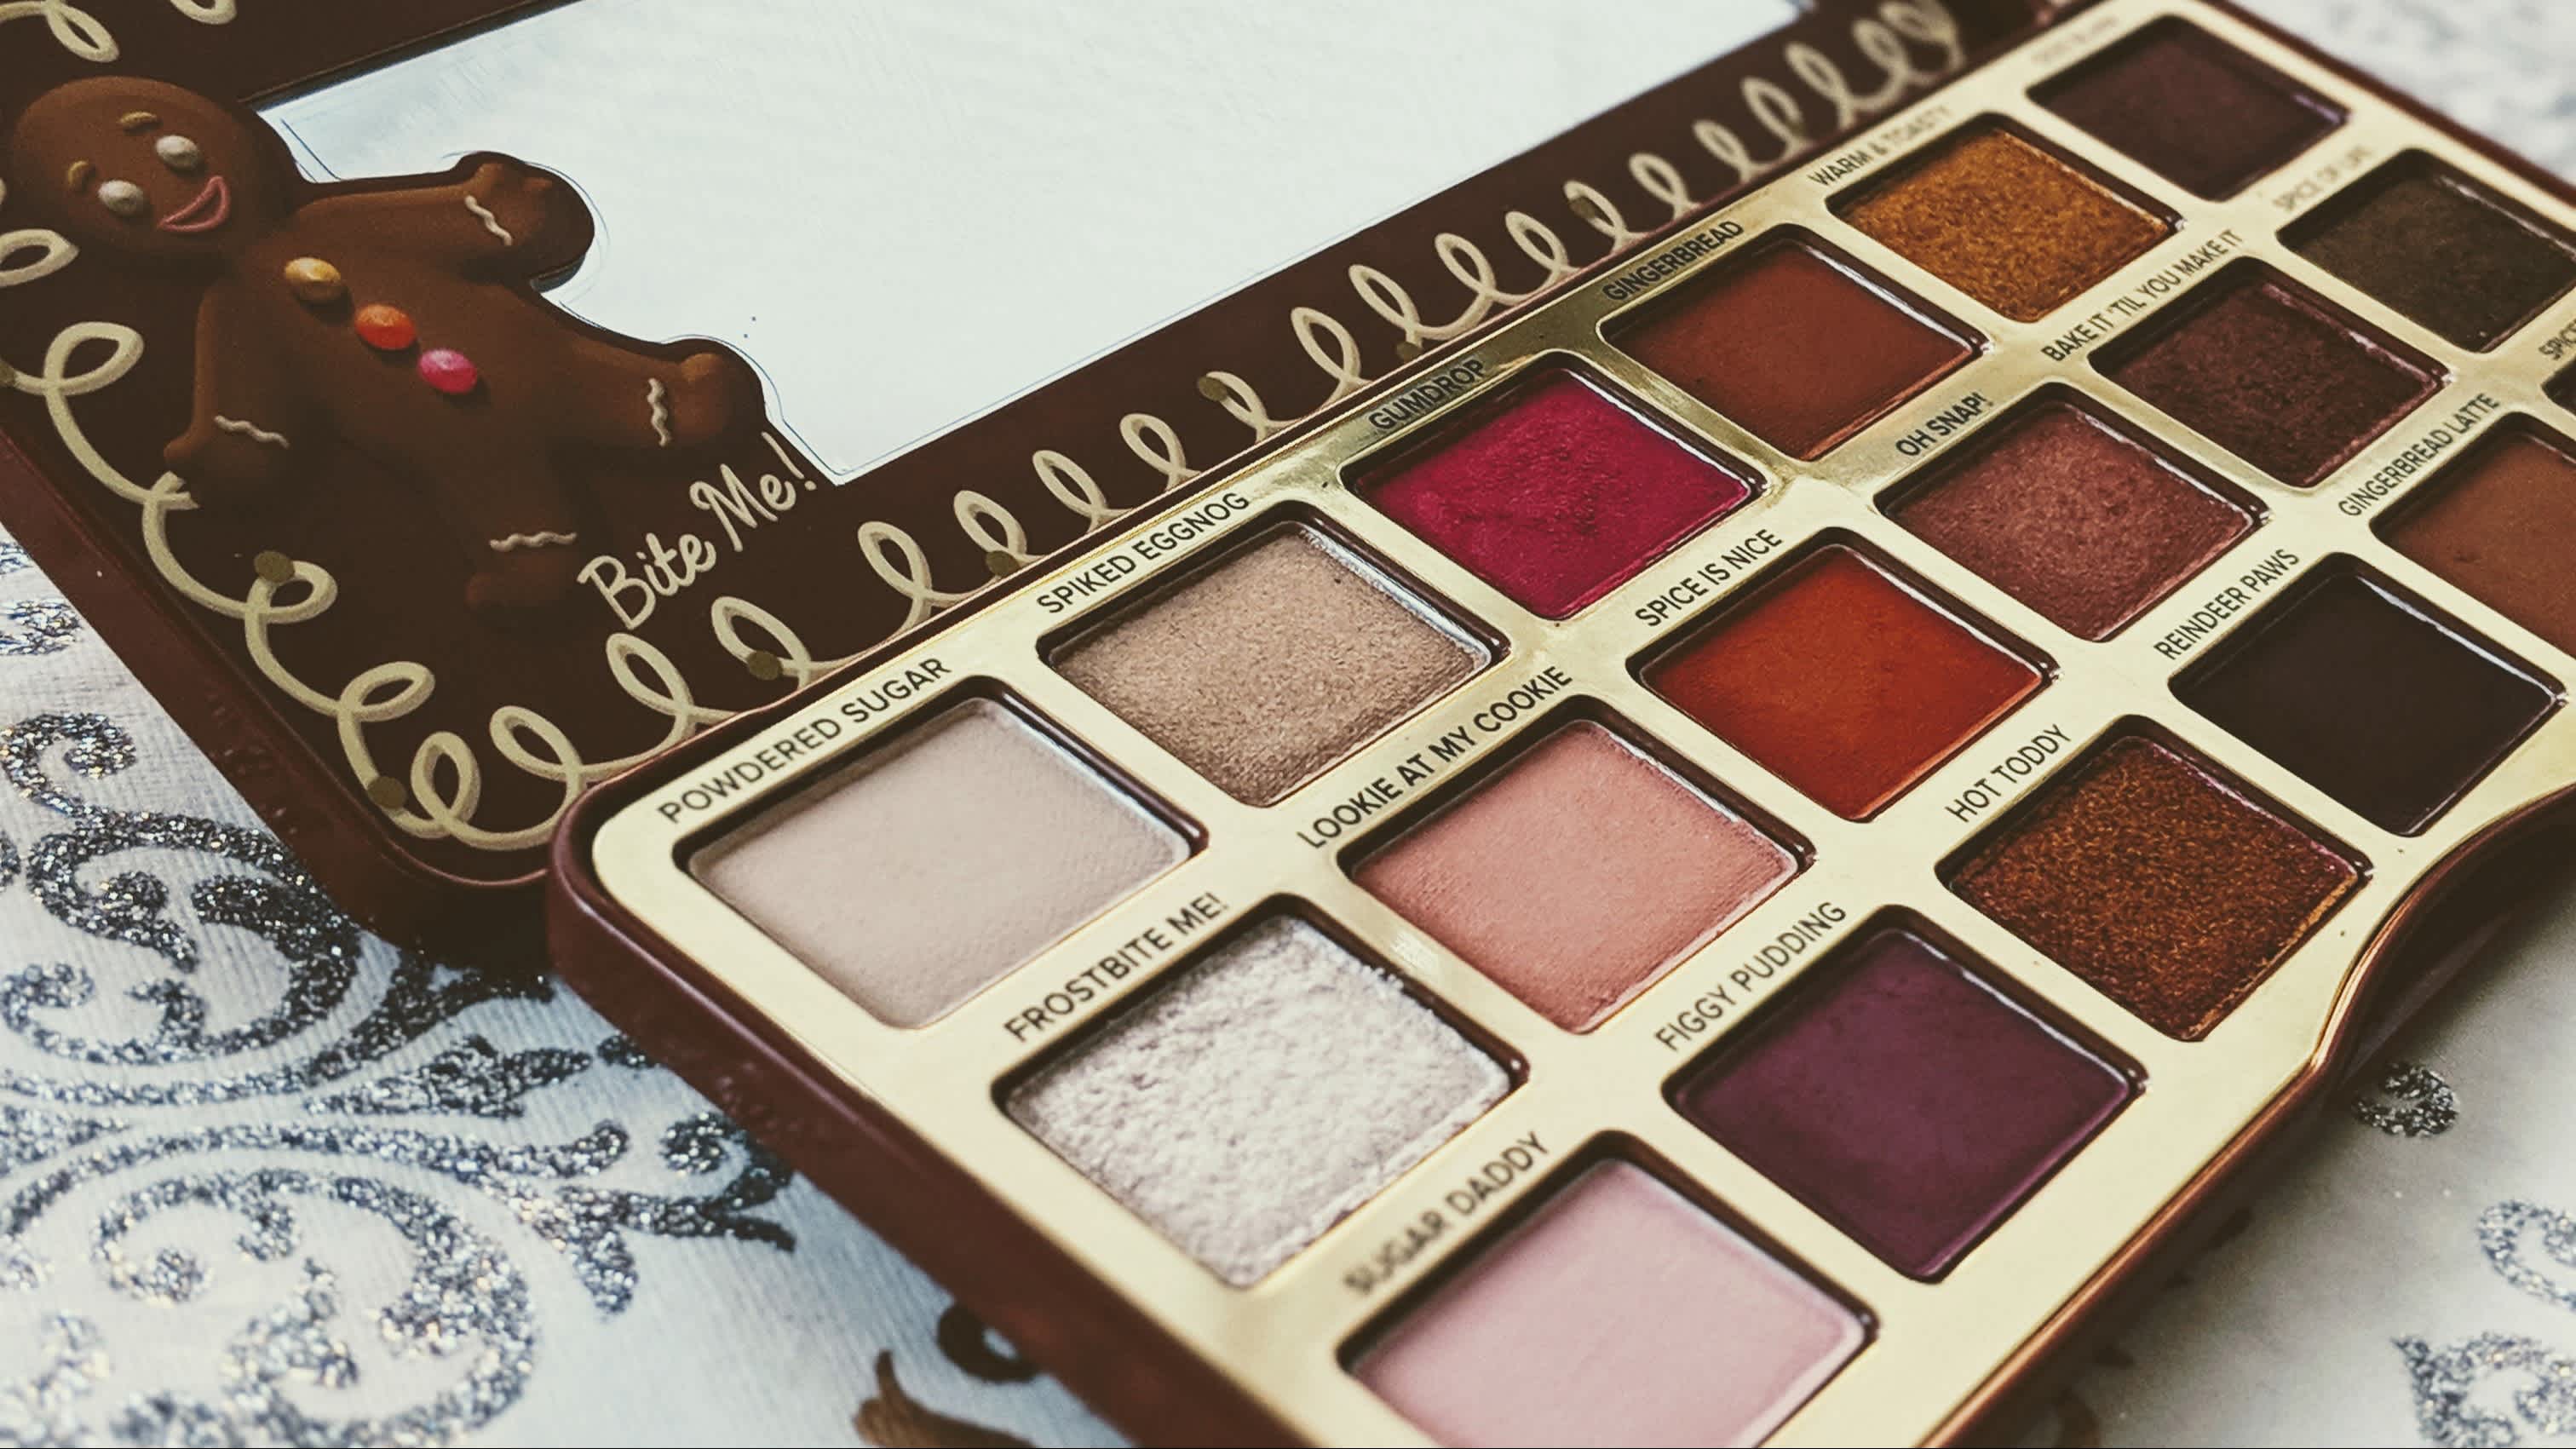 Too Faced Gingerbread Spice Eyeshadow Palette Review and Swatches